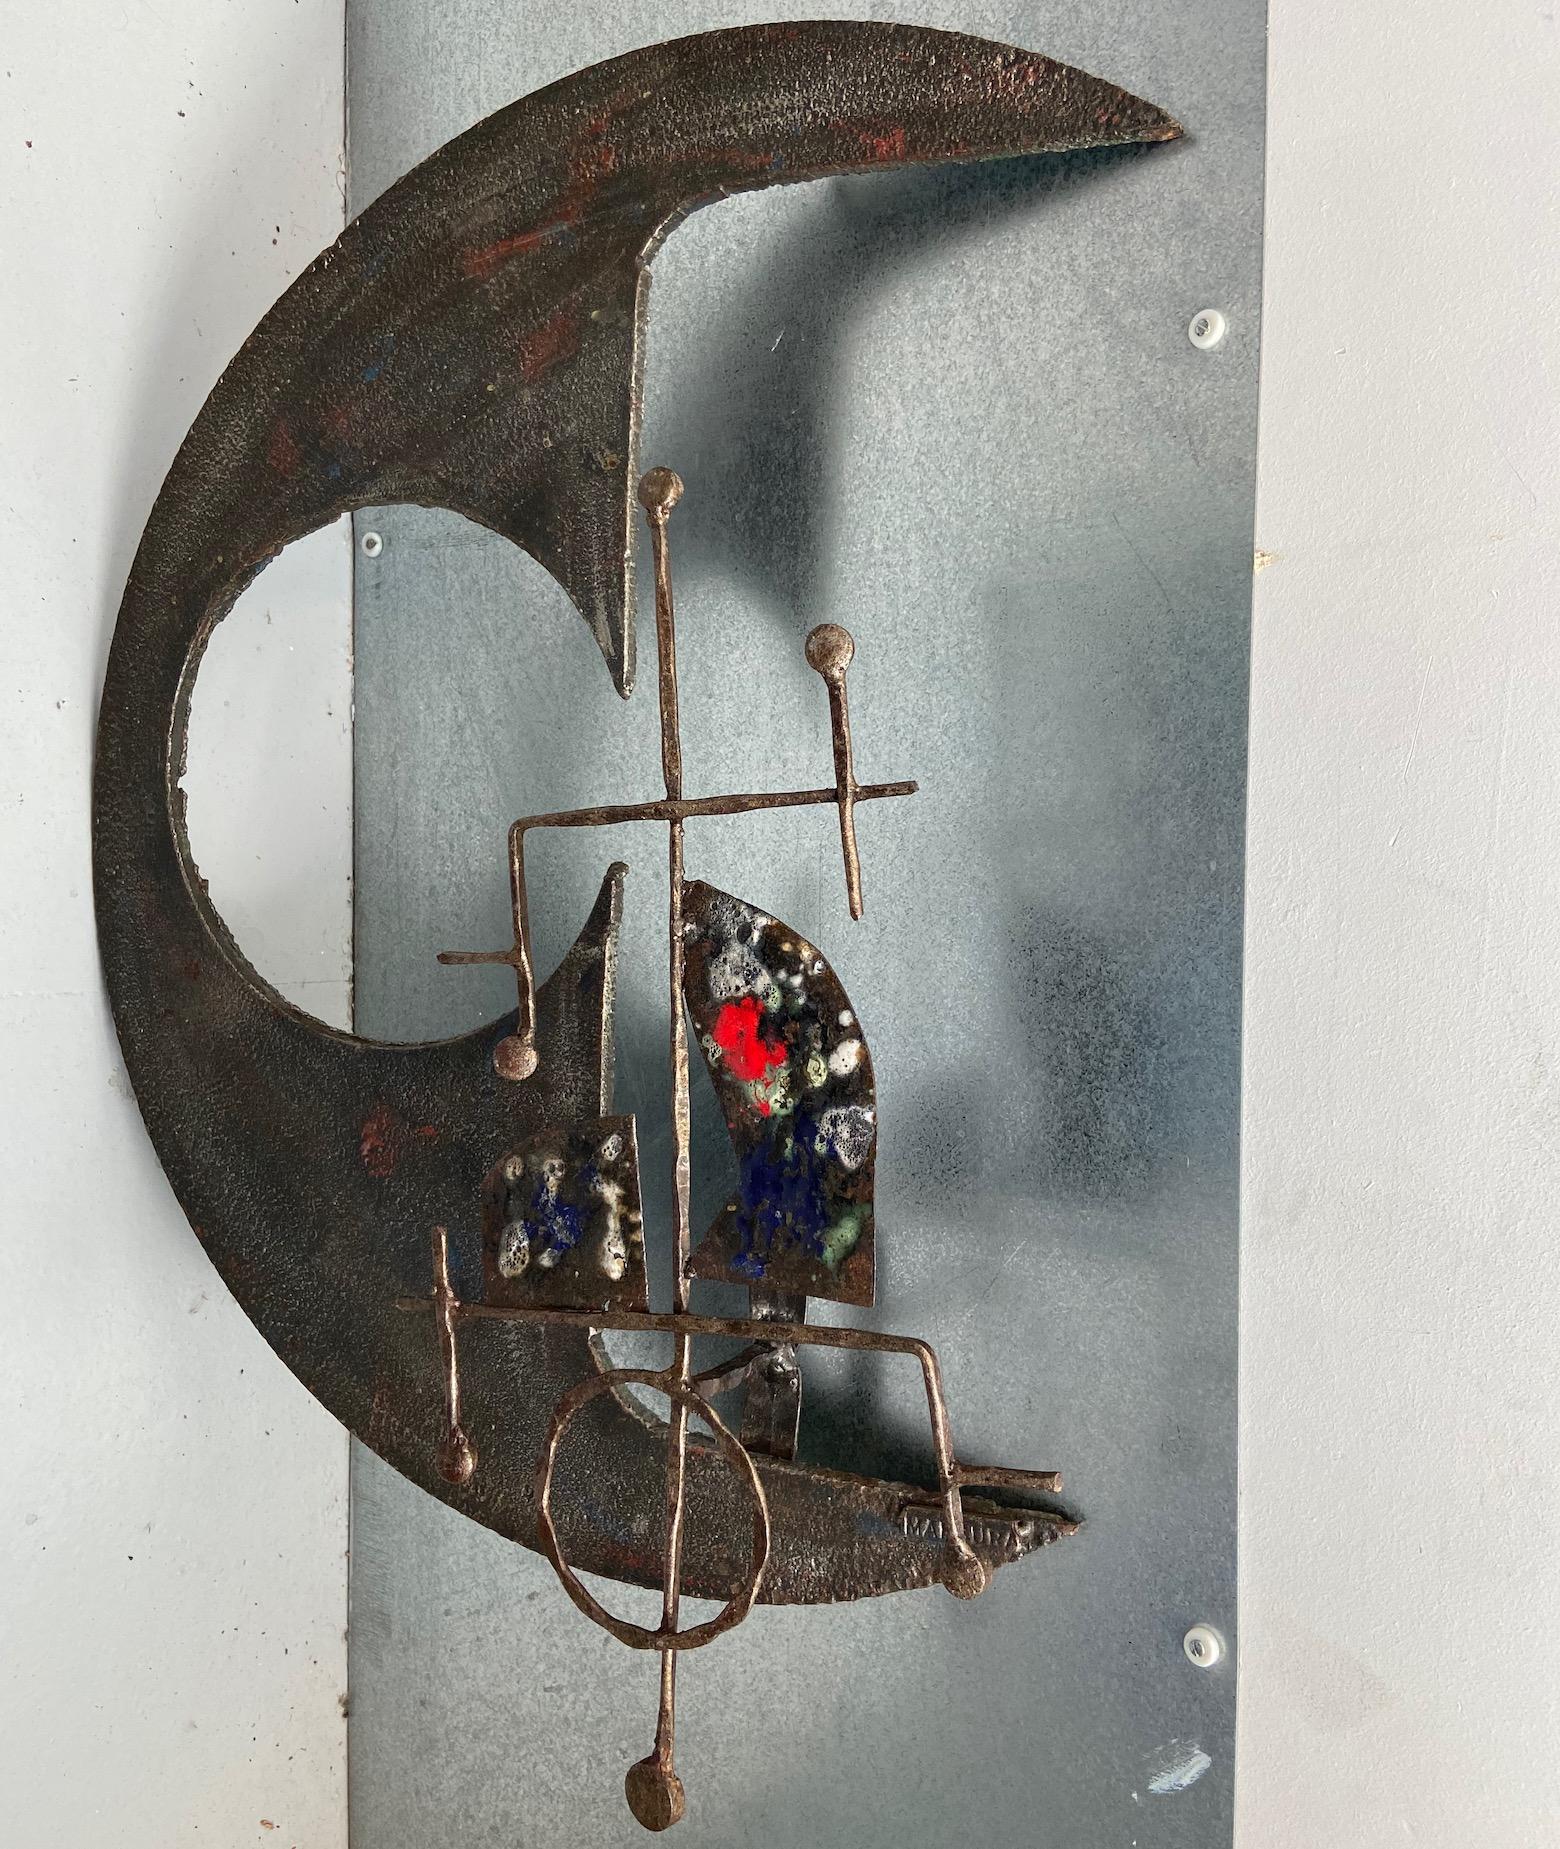 Wrought Iron and Enamel Brutalist Wall Sculpture by Salvino Marsura circa 1970's For Sale 2